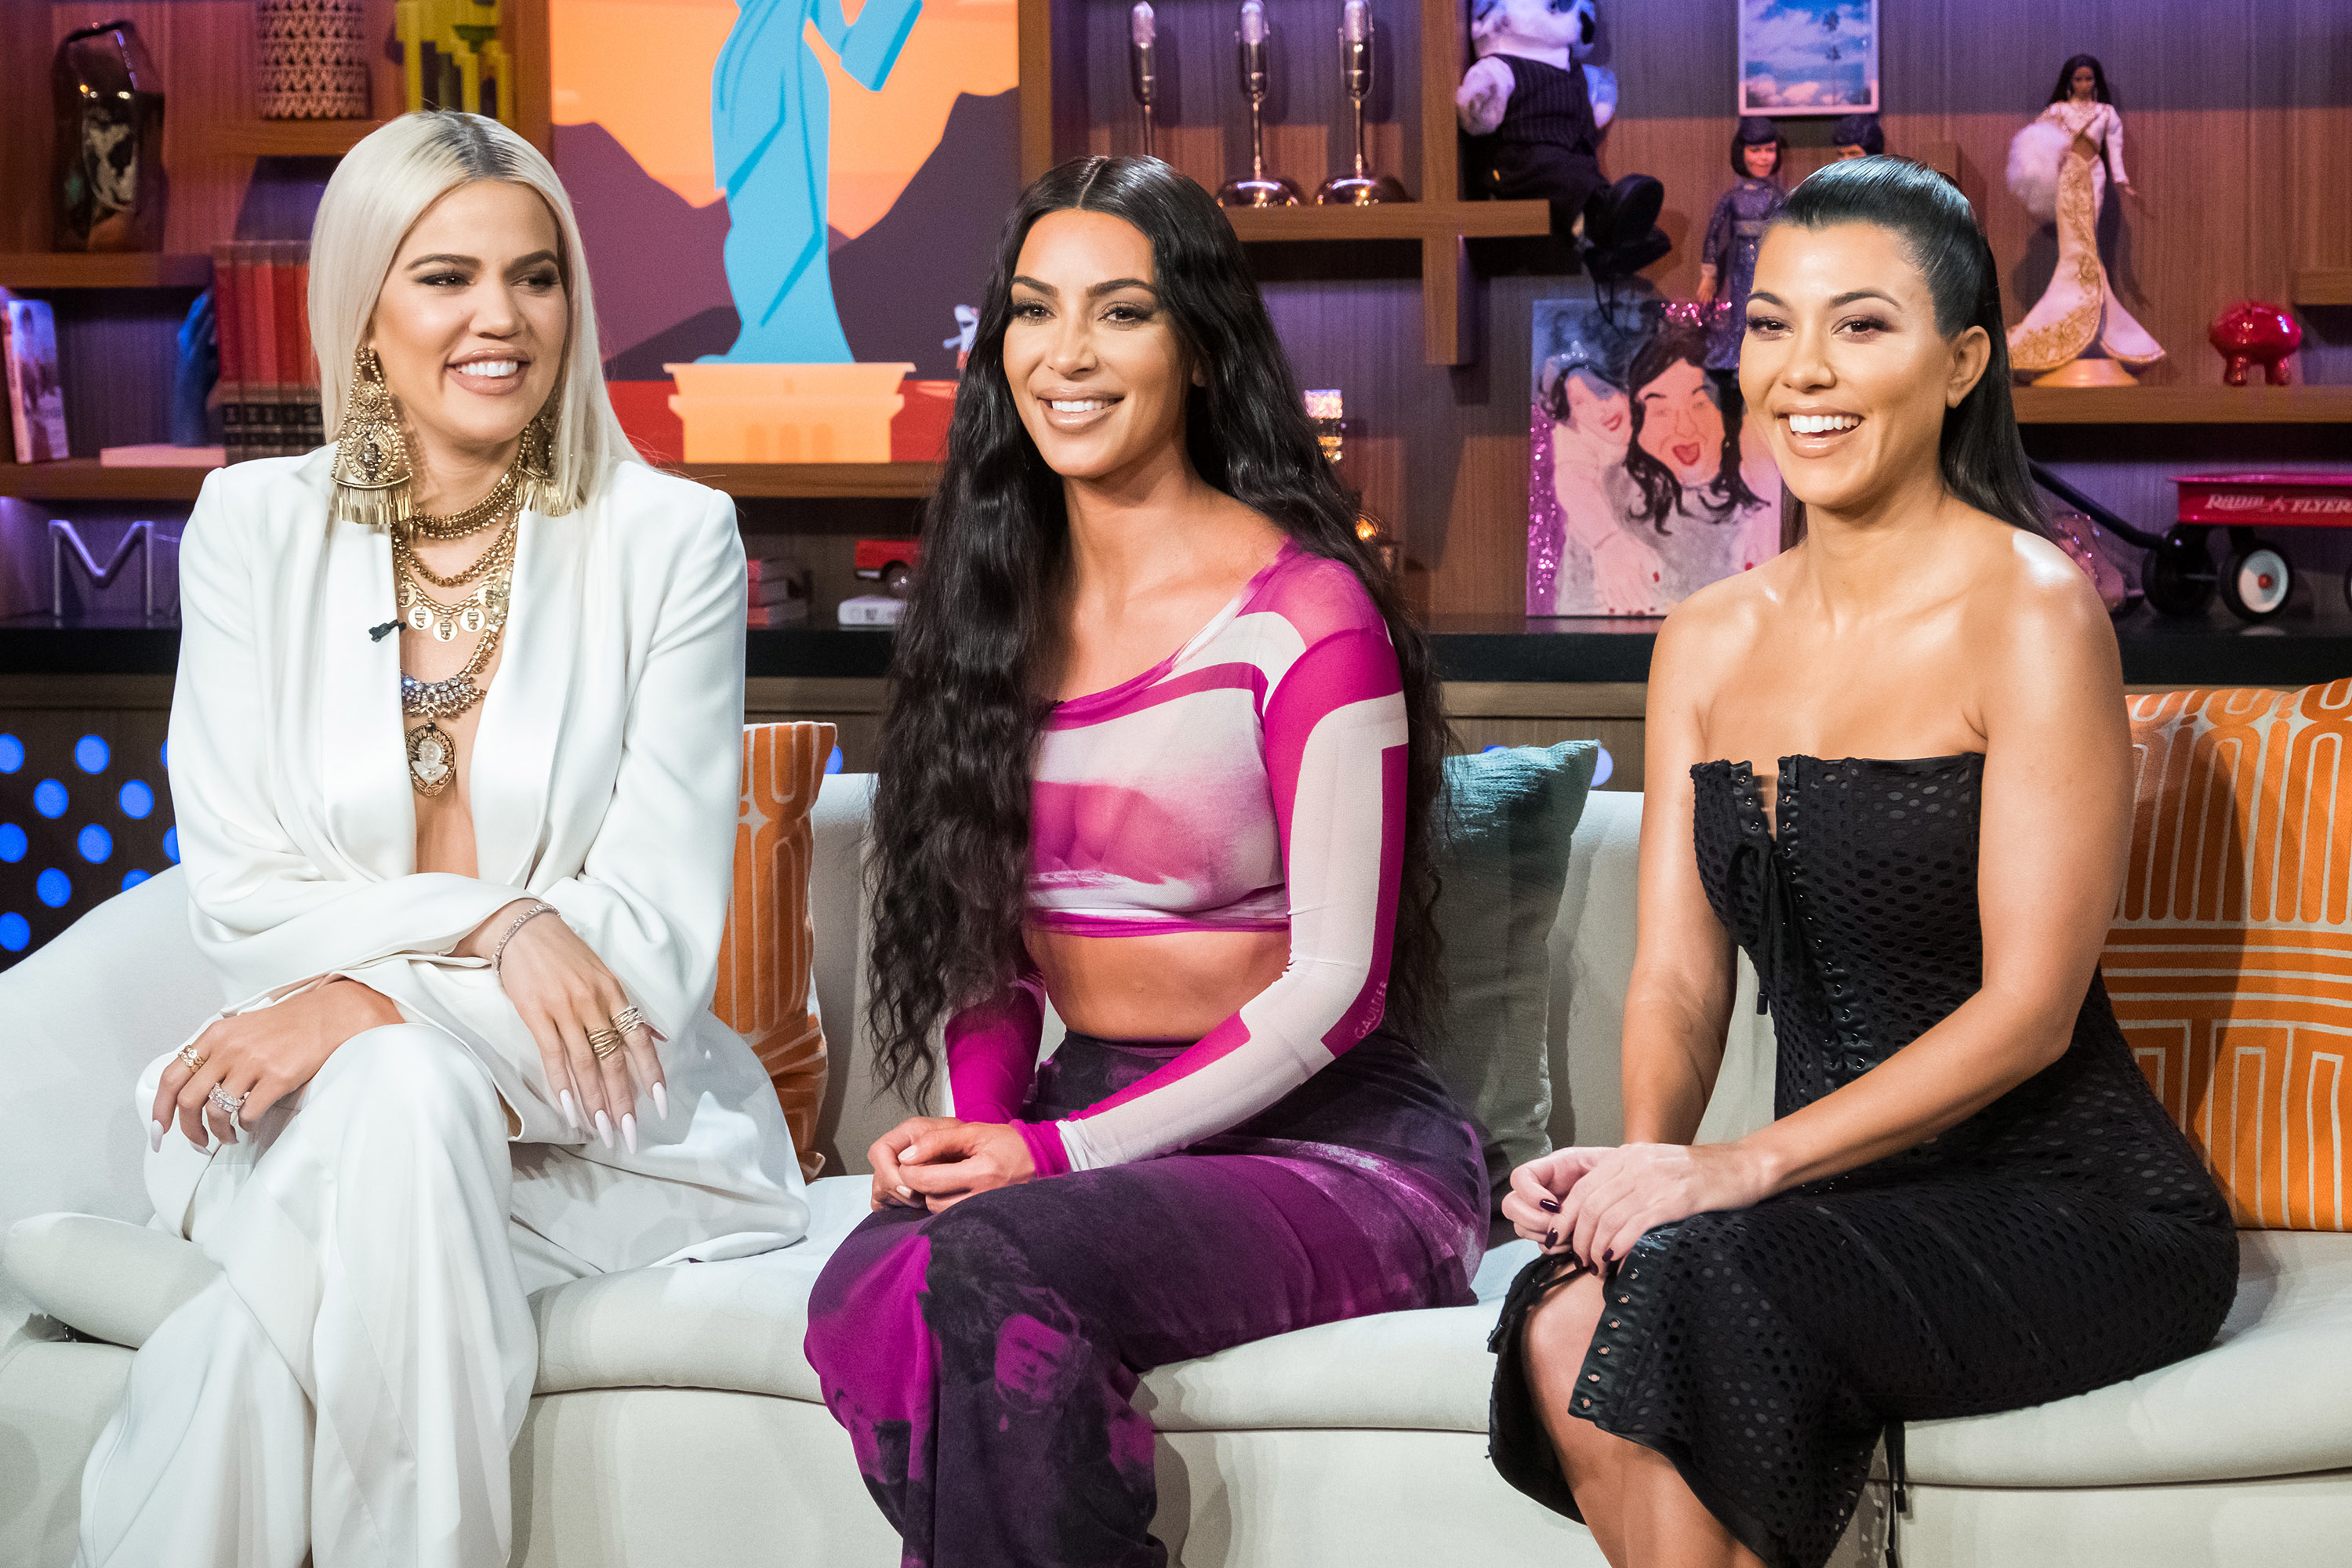 khloe, kim, and kourtney sitting for an interview